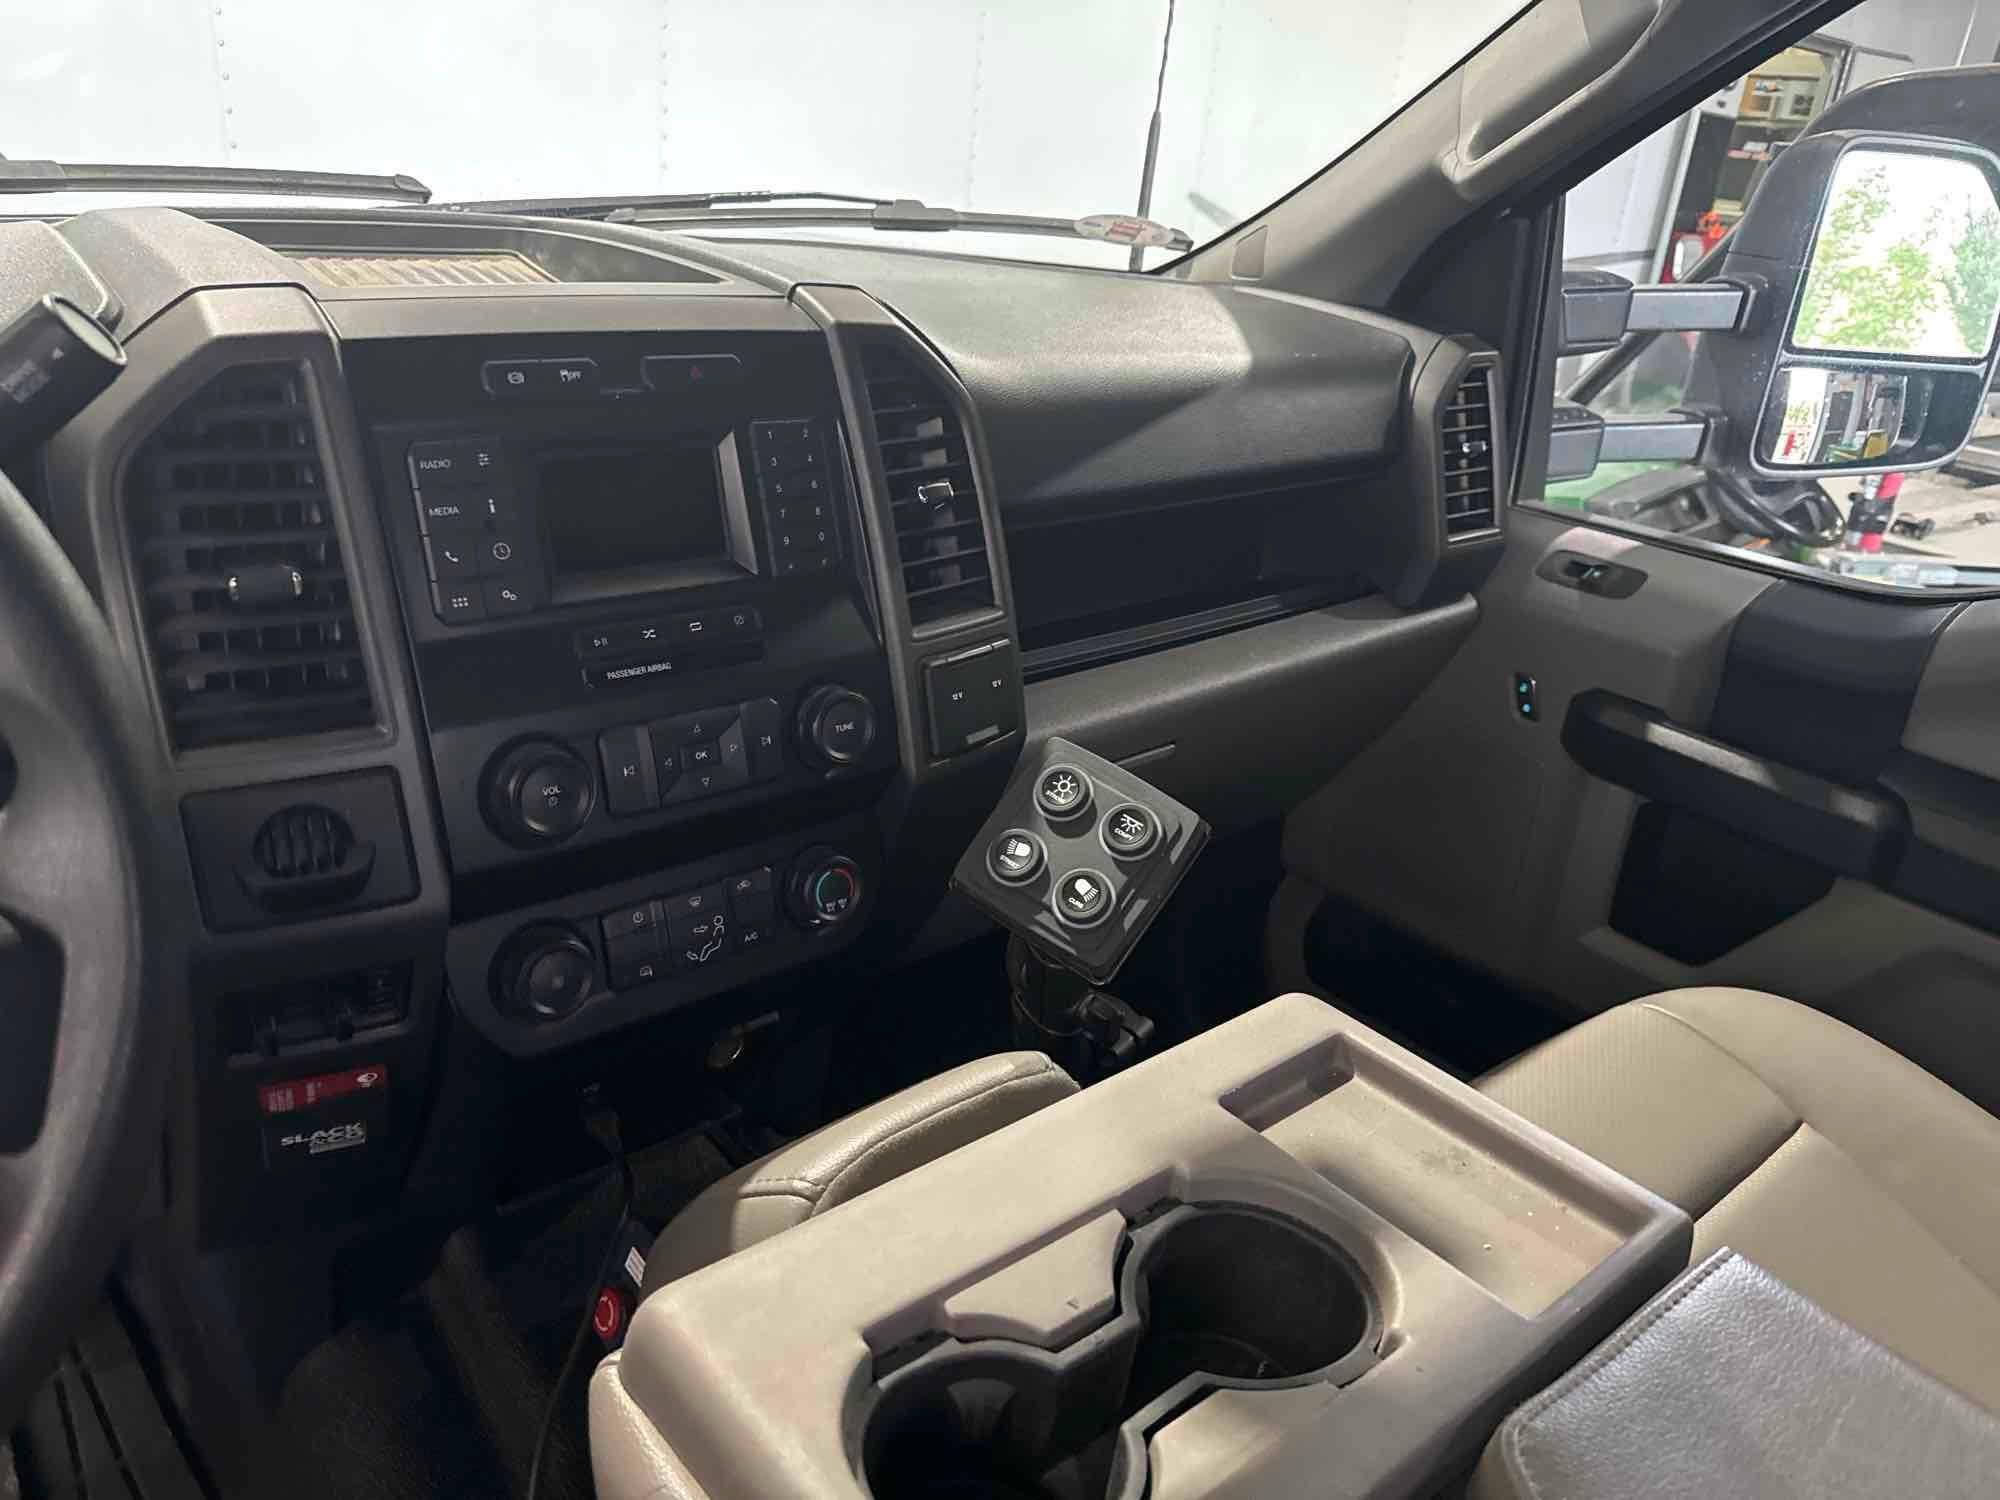 2022 FORD F550XL SERVICE TRUCK VN:607291 powered by Power Stroke 6.7 diesel engine, equipped with